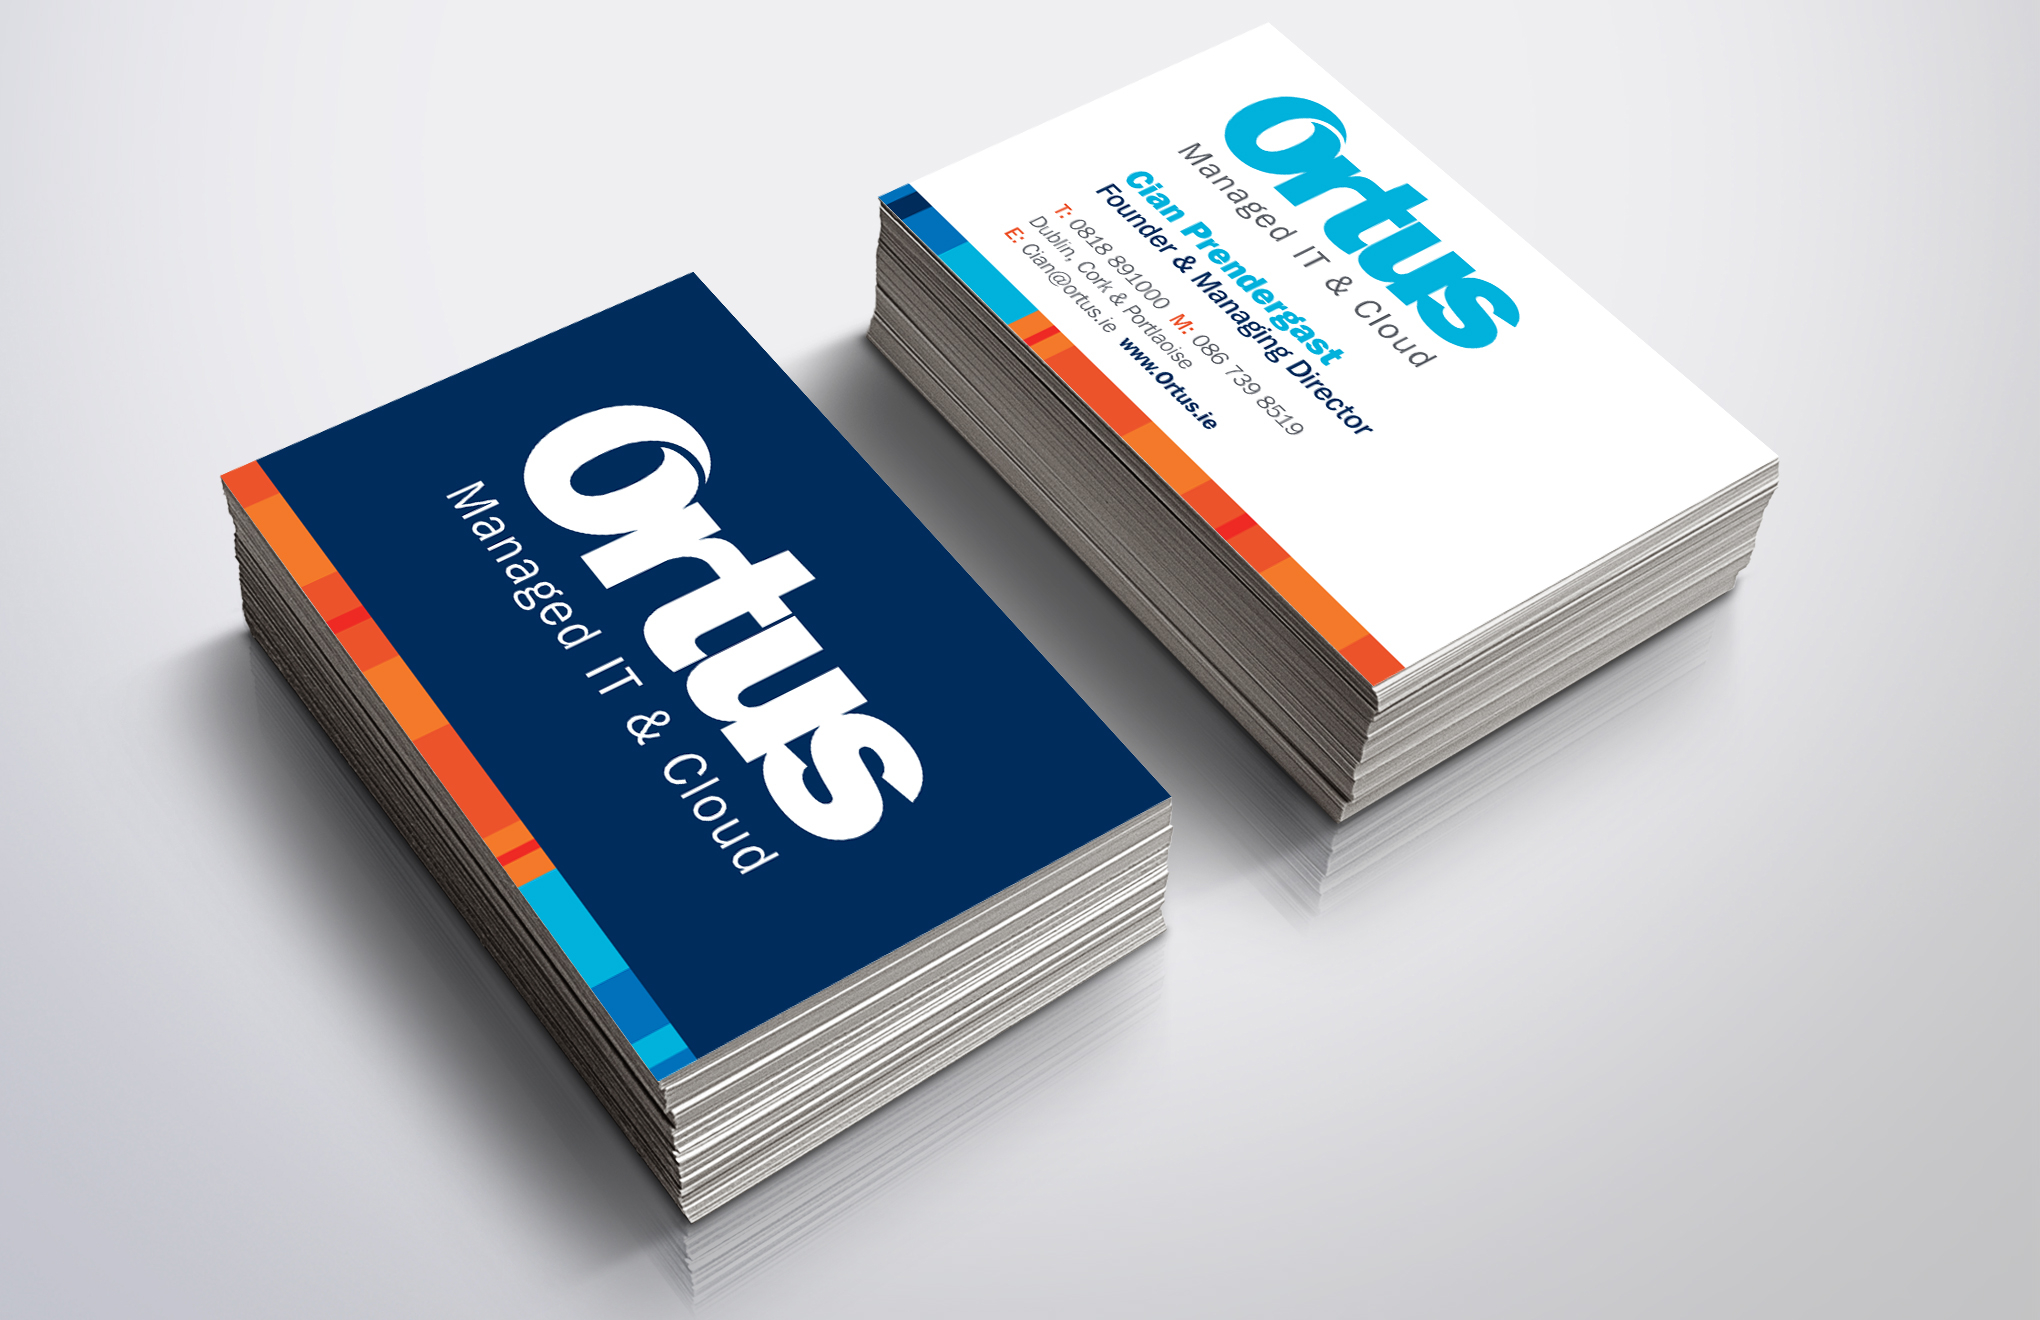 Ortus business cards